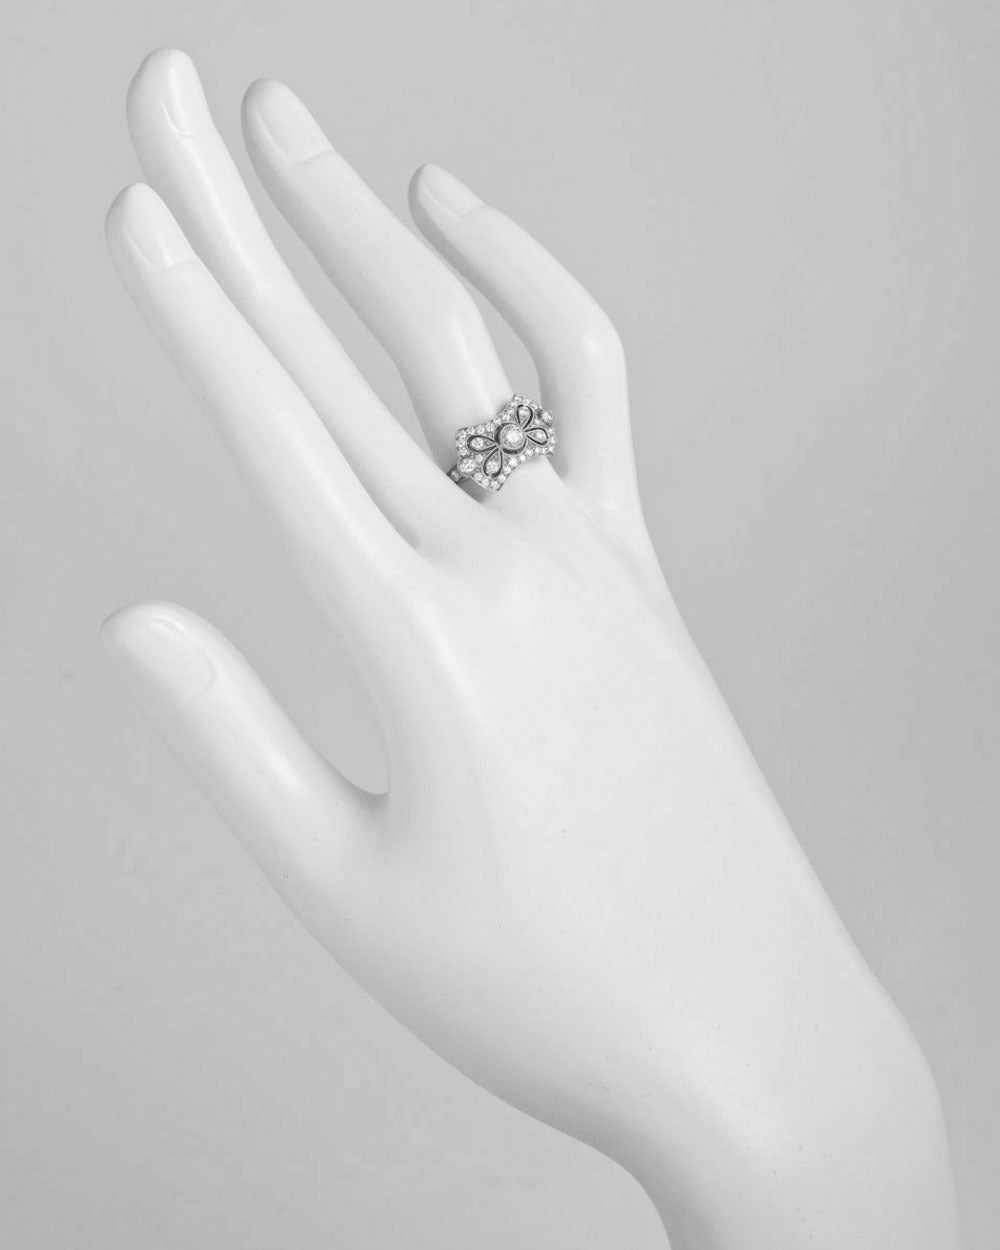 Diamond bow dress ring, from Kwiat's 'Vintage' collection, set with approximately 0.50 total carats of round diamonds (G-H color/VS1-VS2 clarity), mounted in 18k white gold, signed Kwiat. Size 7.